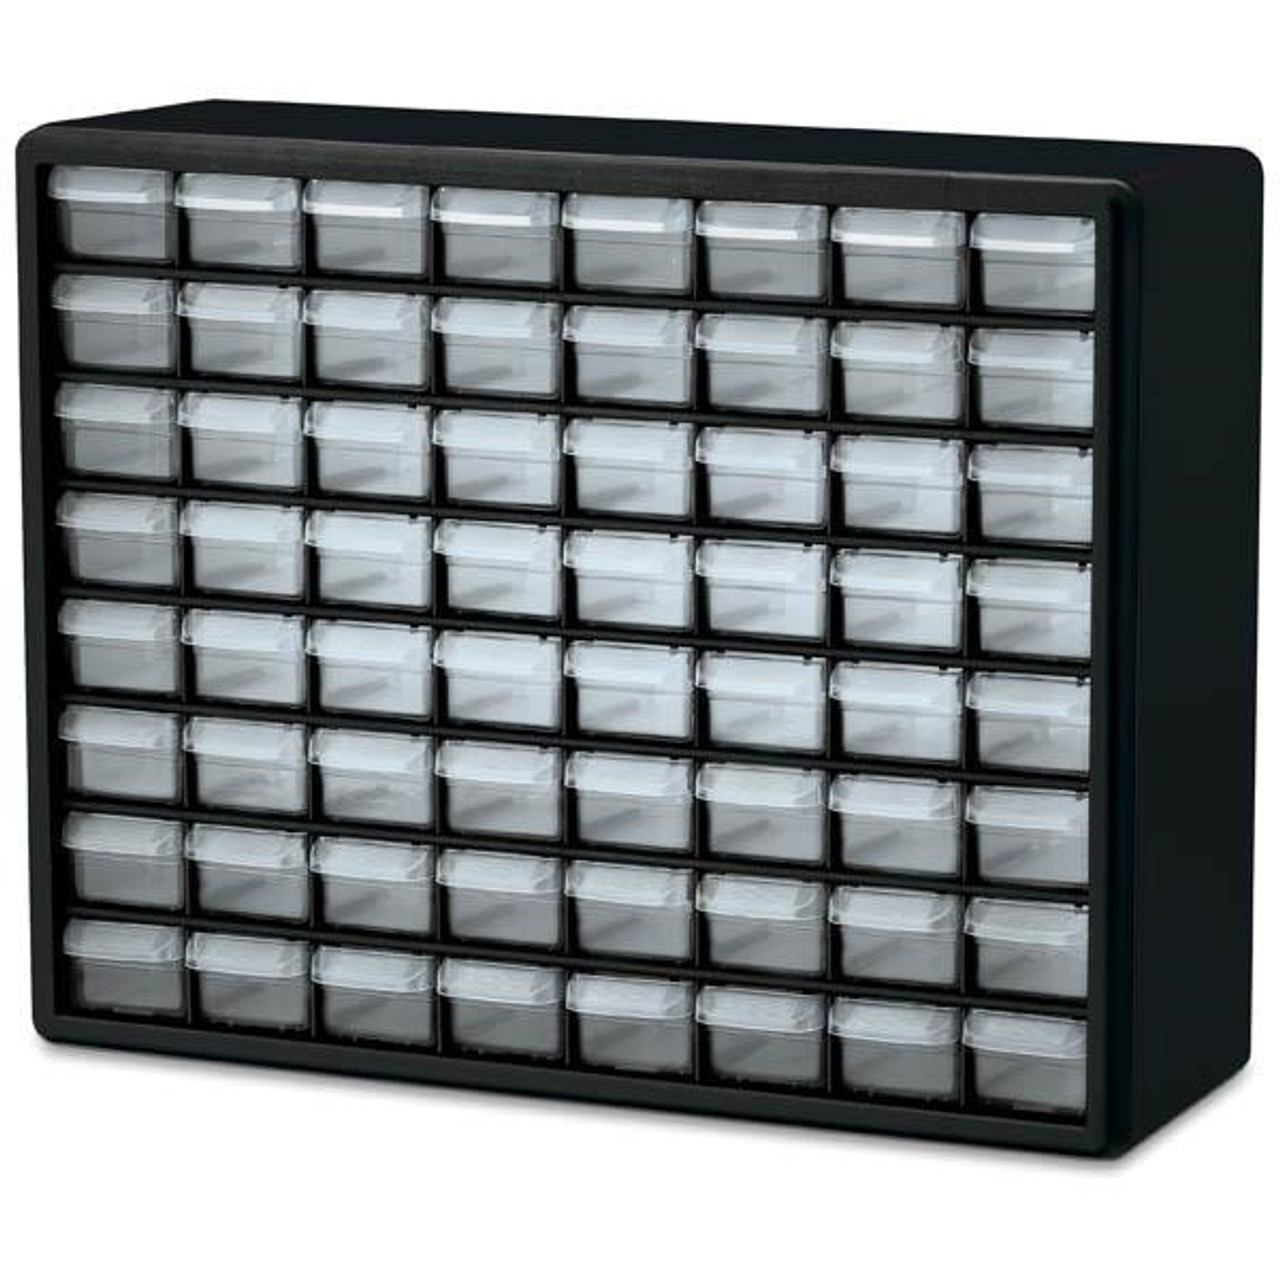 Plastic Storage Cabinet, 44 Drawer (12 Large/32 Small)